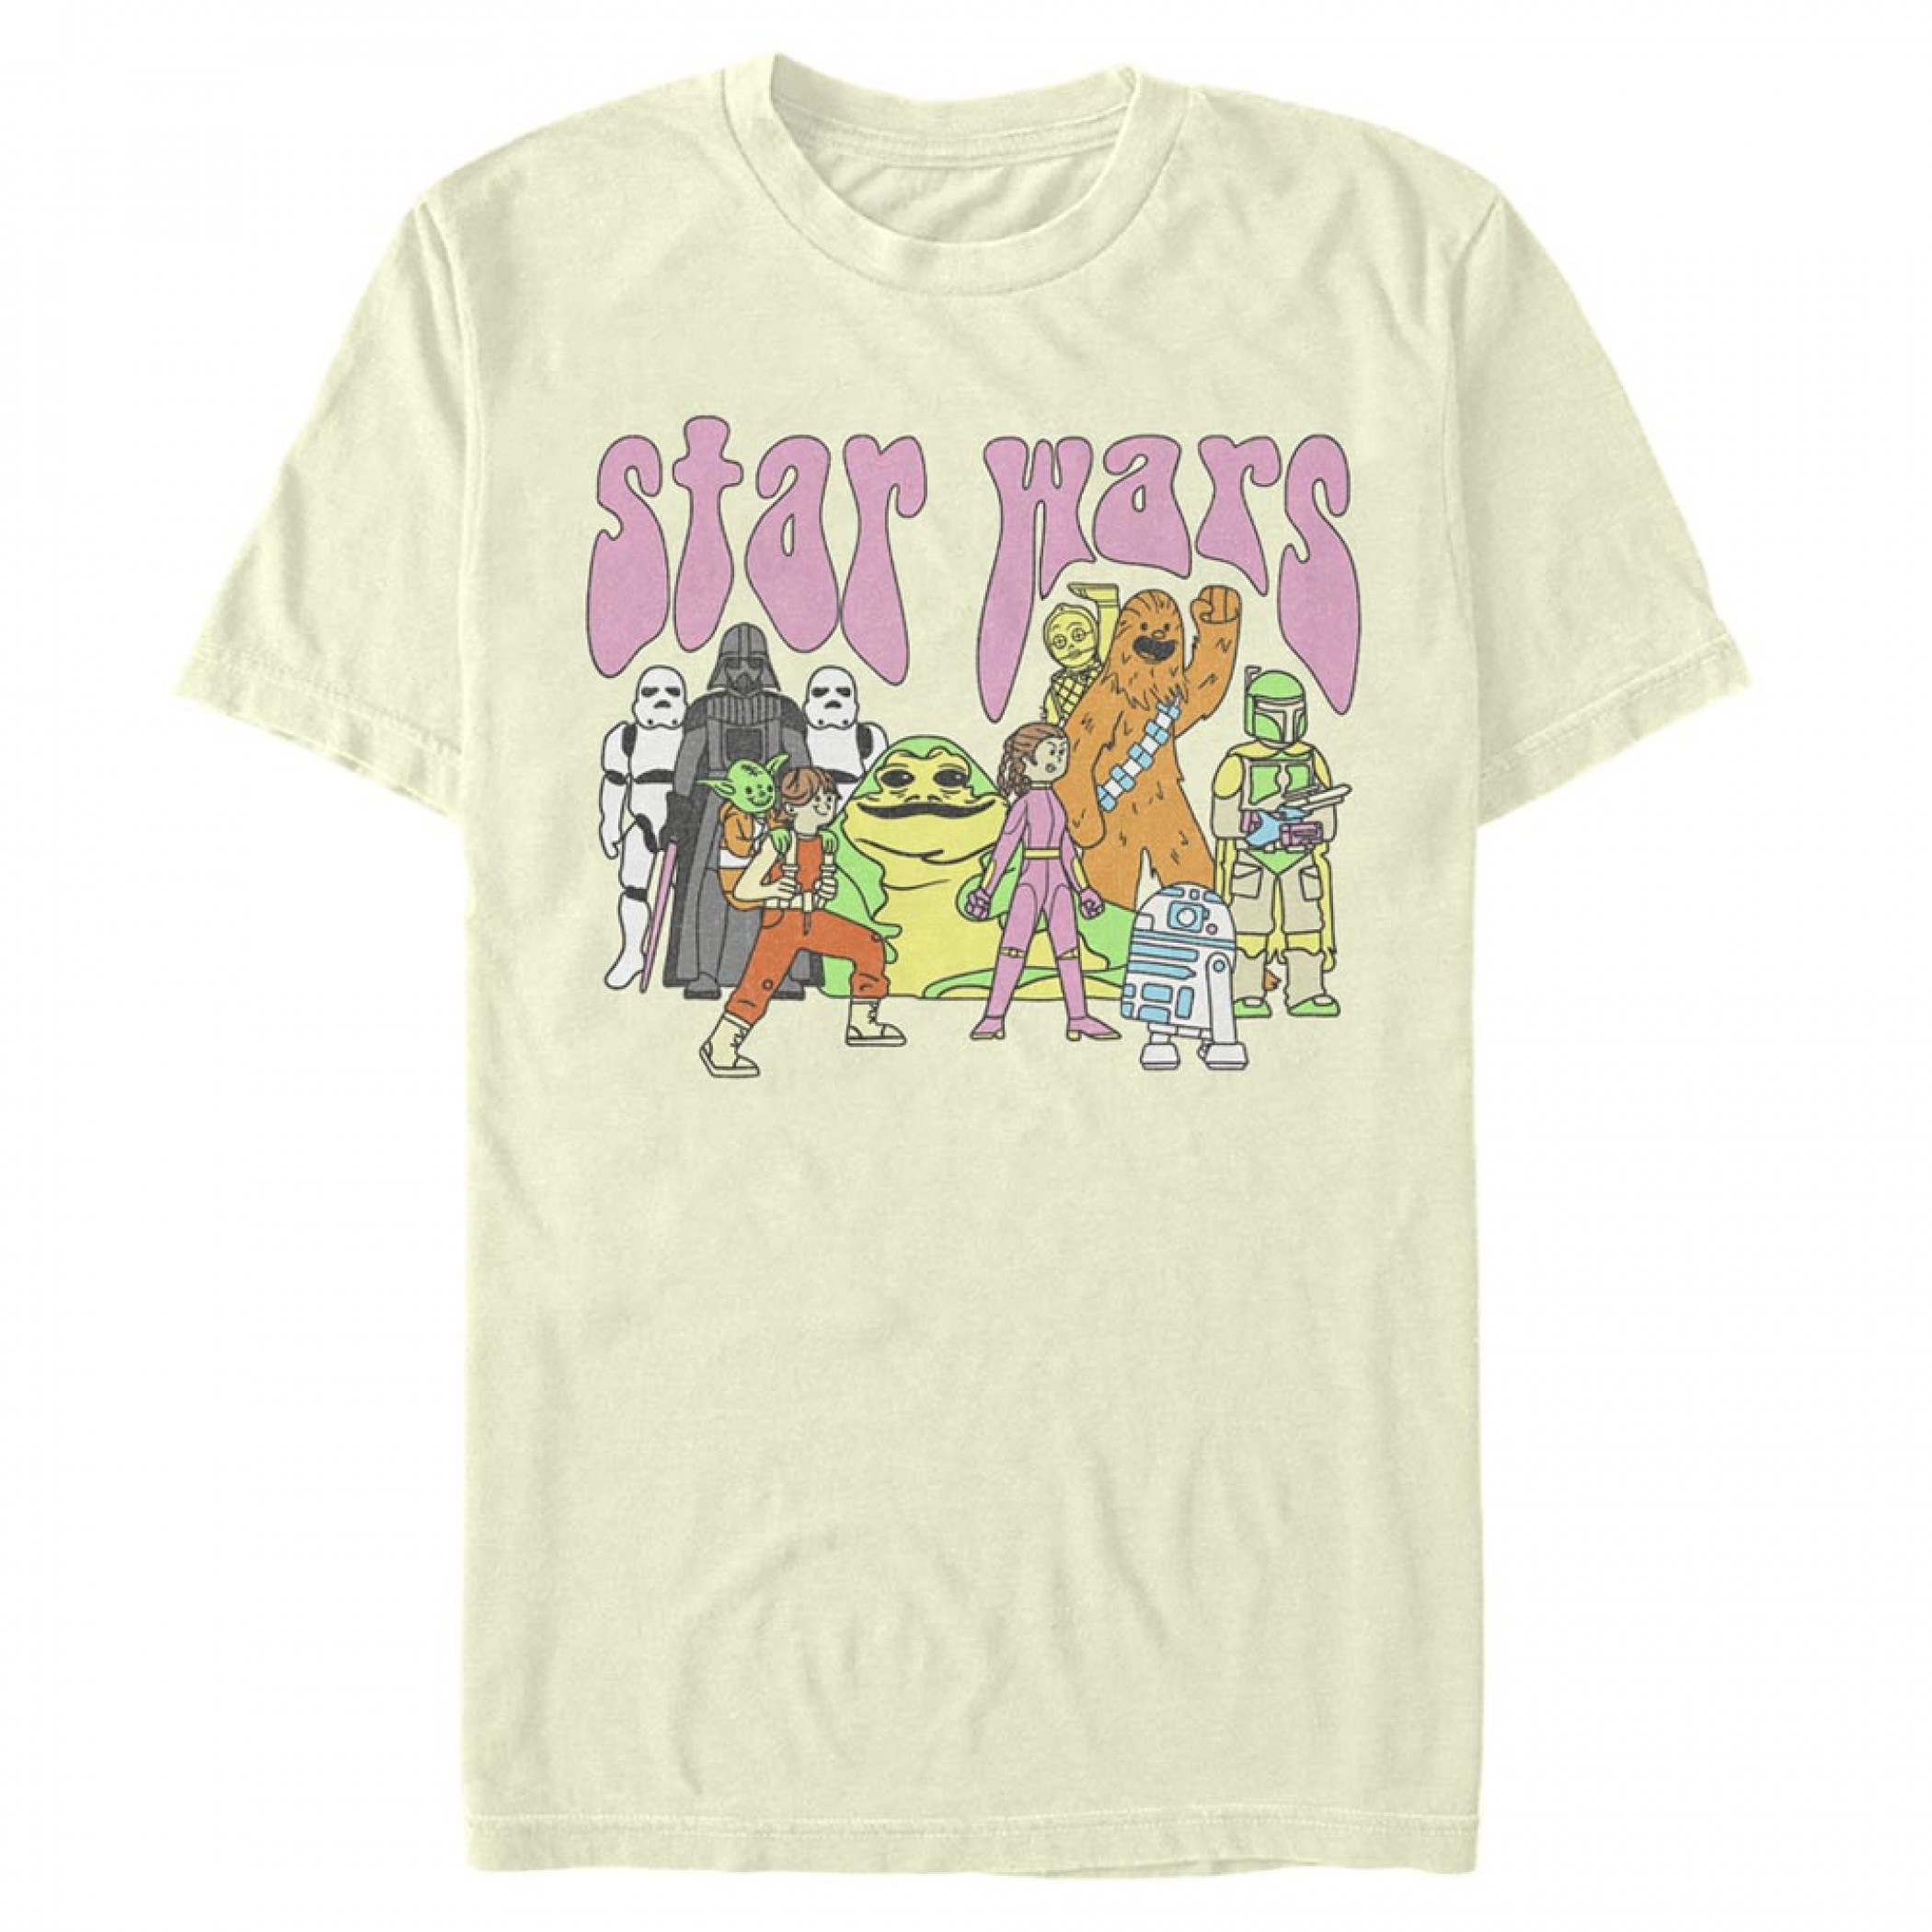 Star Wars Psychedelic Characters T-Shirt